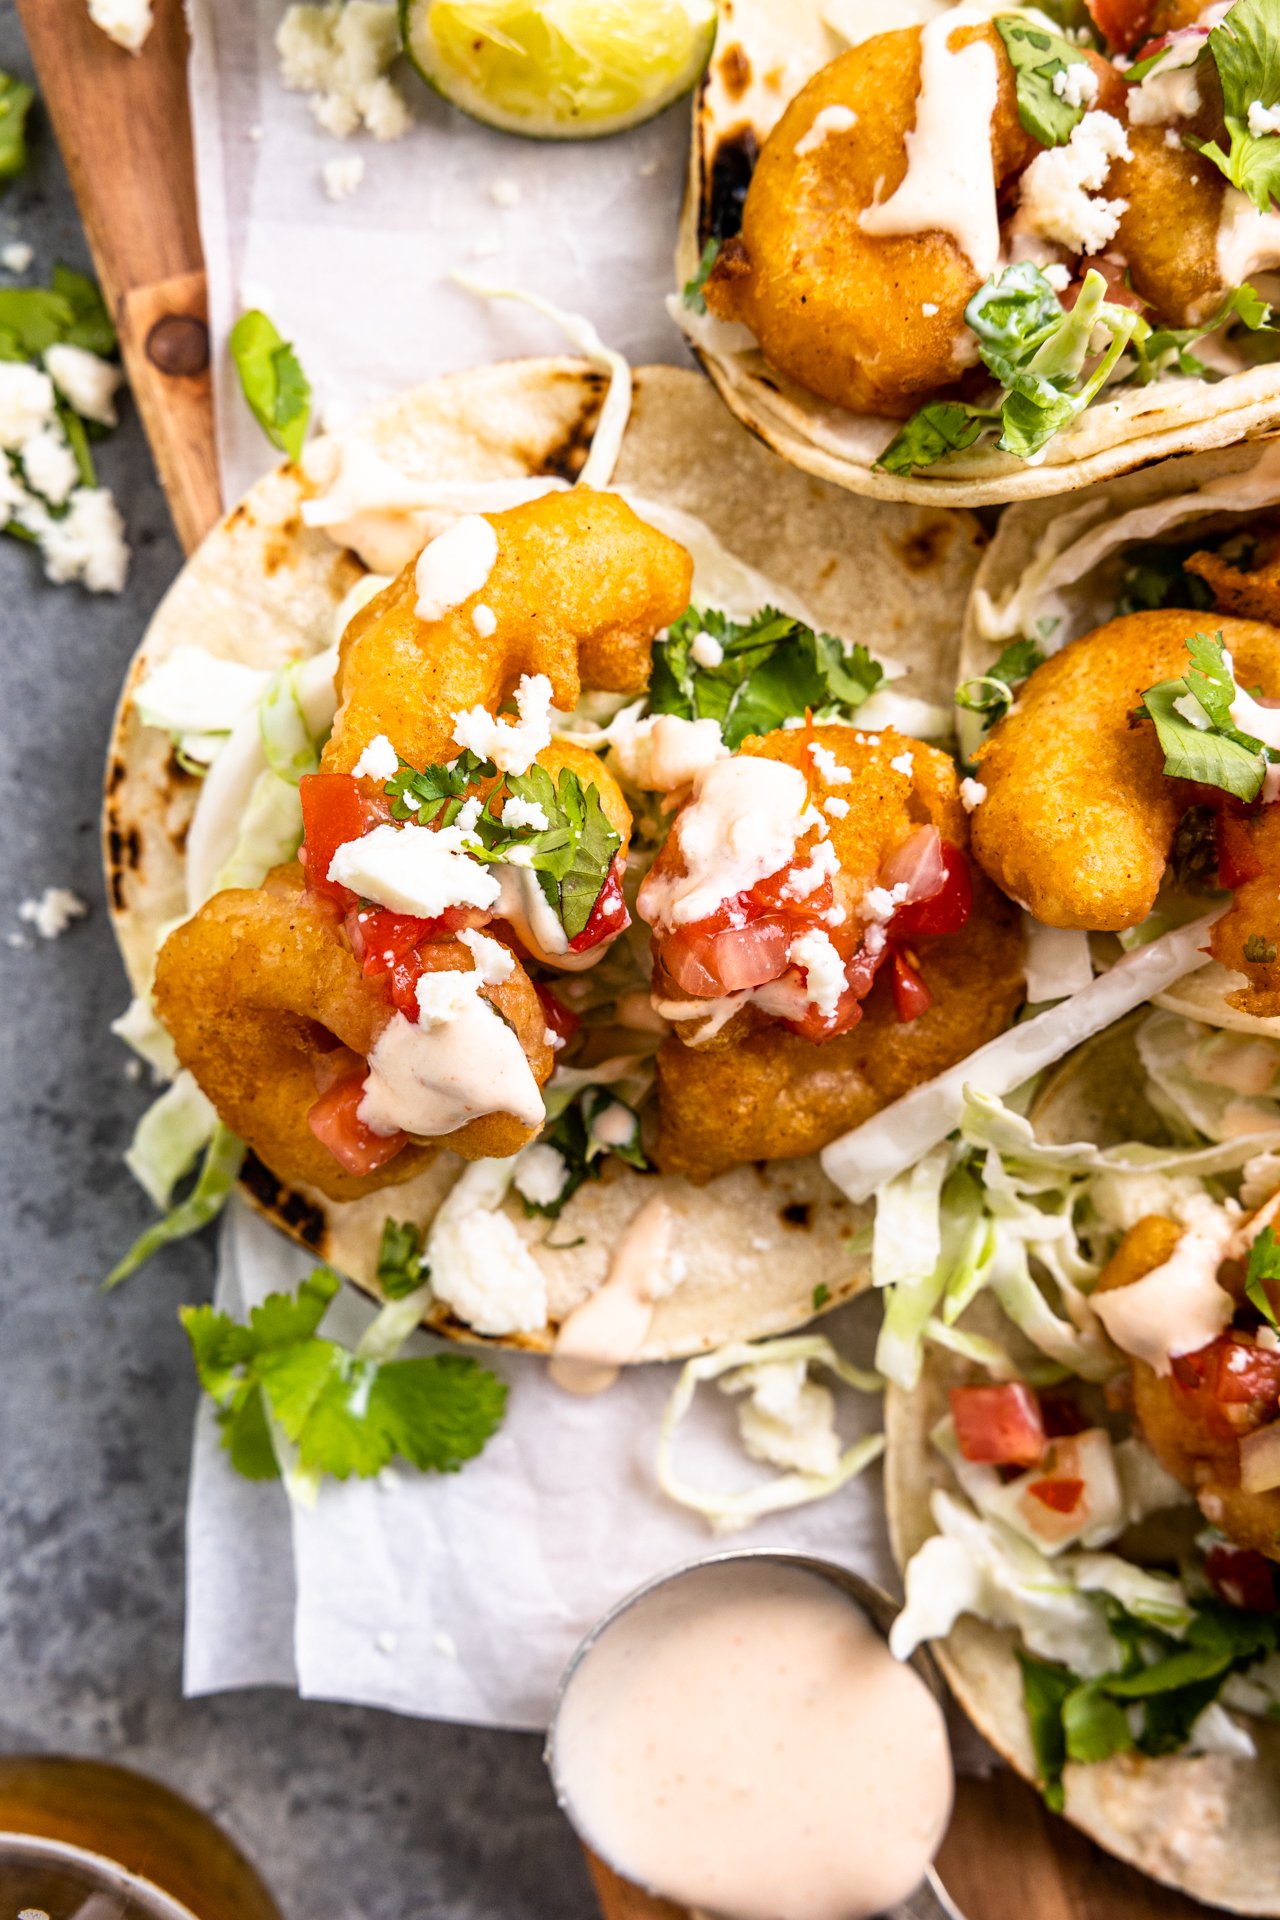 Corn tortillas loaded up with crispy slaw, fried shrimp and drizzled with fish taco sauce.